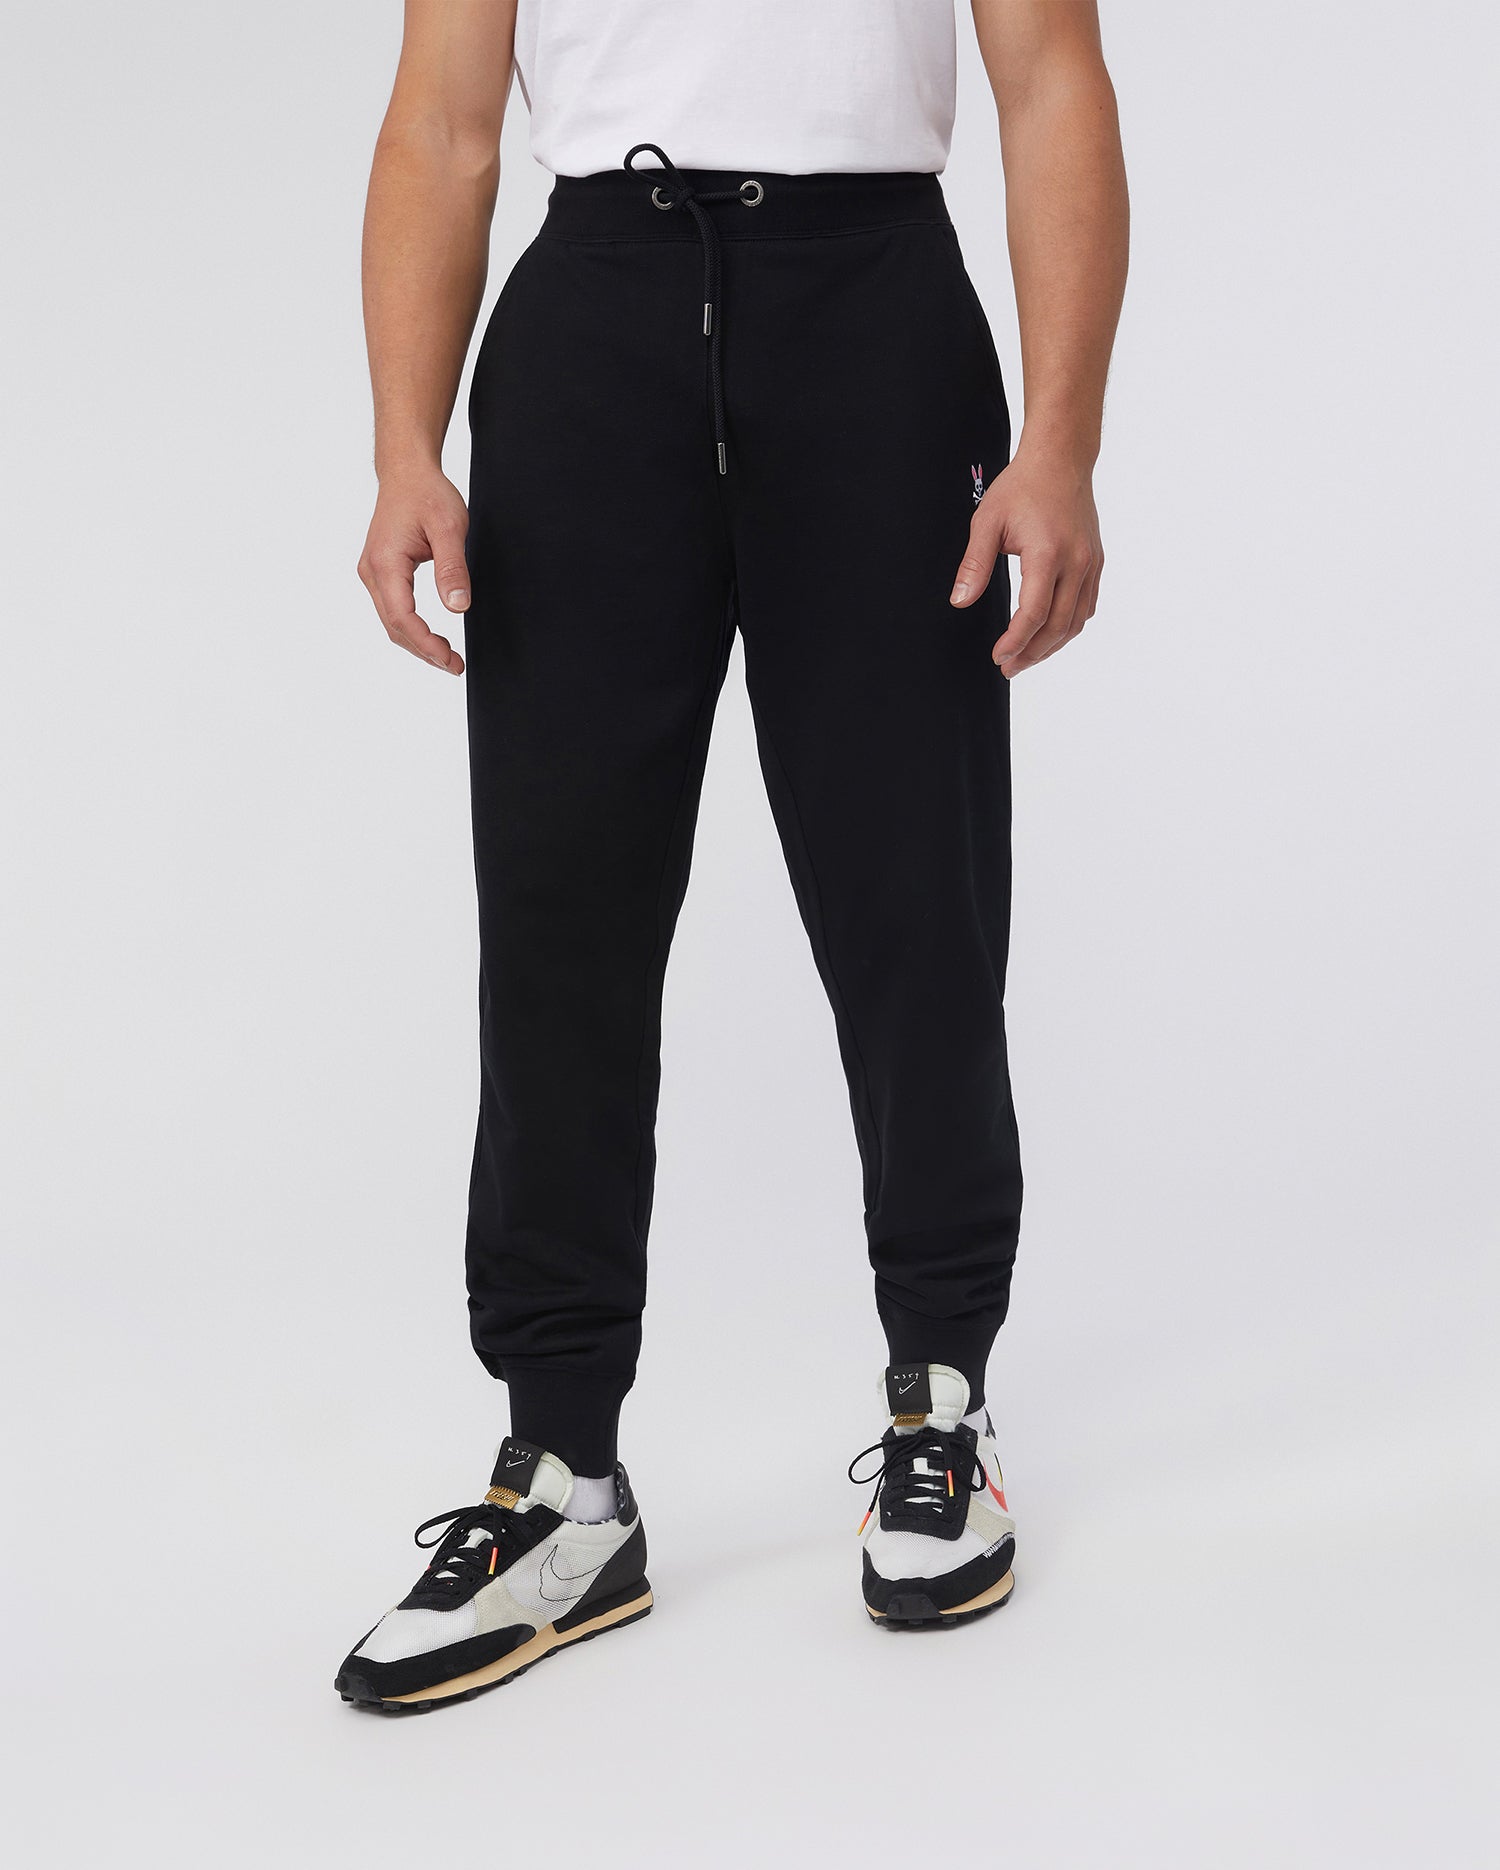 MENS FRENCH TERRY KNIT BLACK JOGGERS | PSYCHO BUNNY